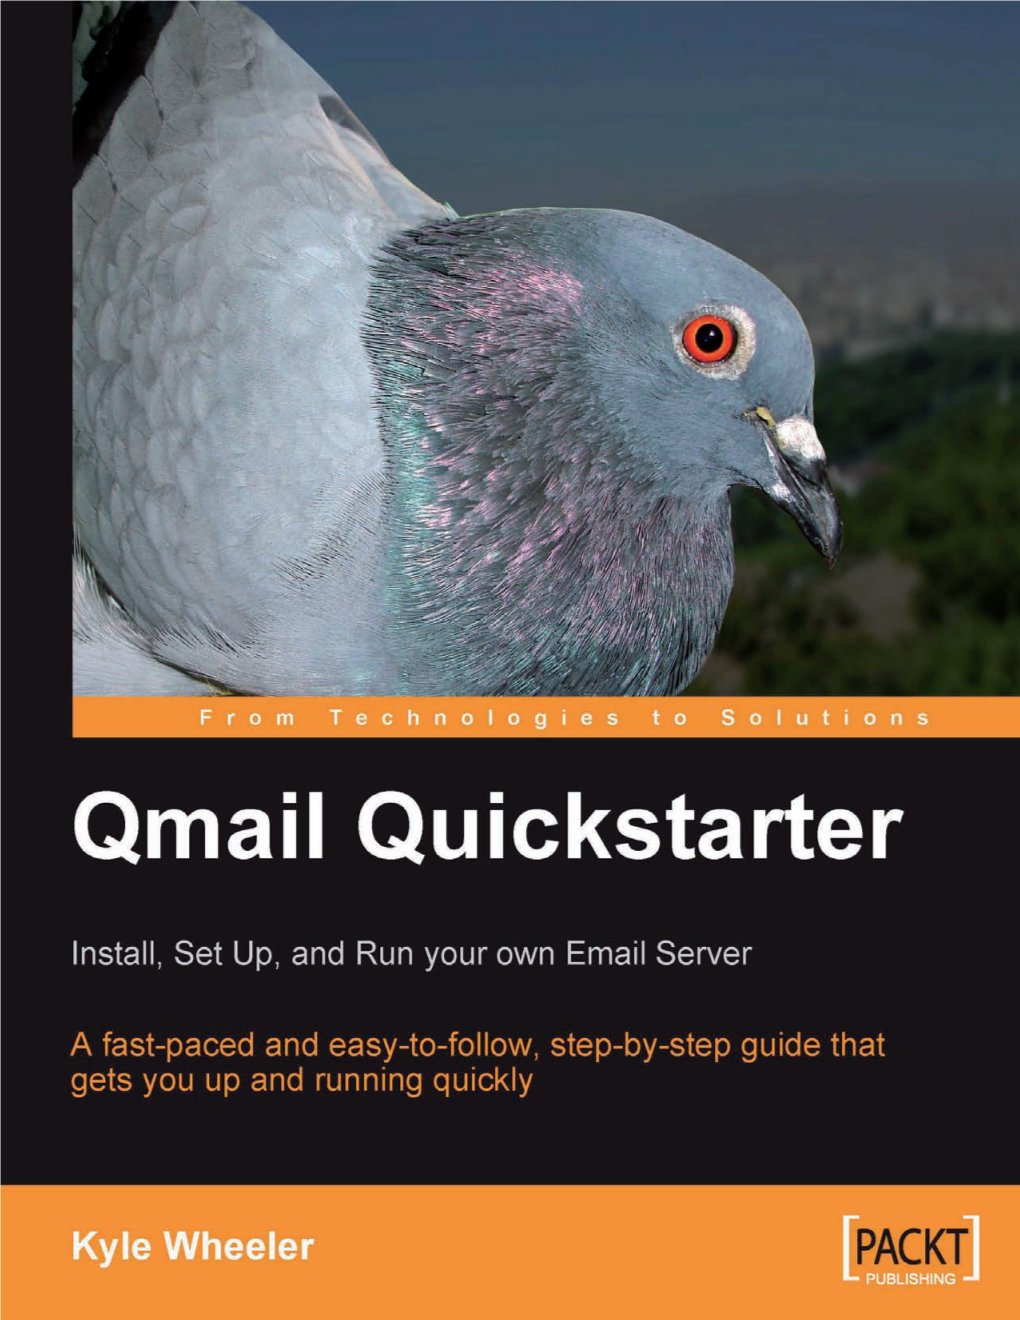 Qmail Quickstarter: Install, Set up and Run Your Own Email Server